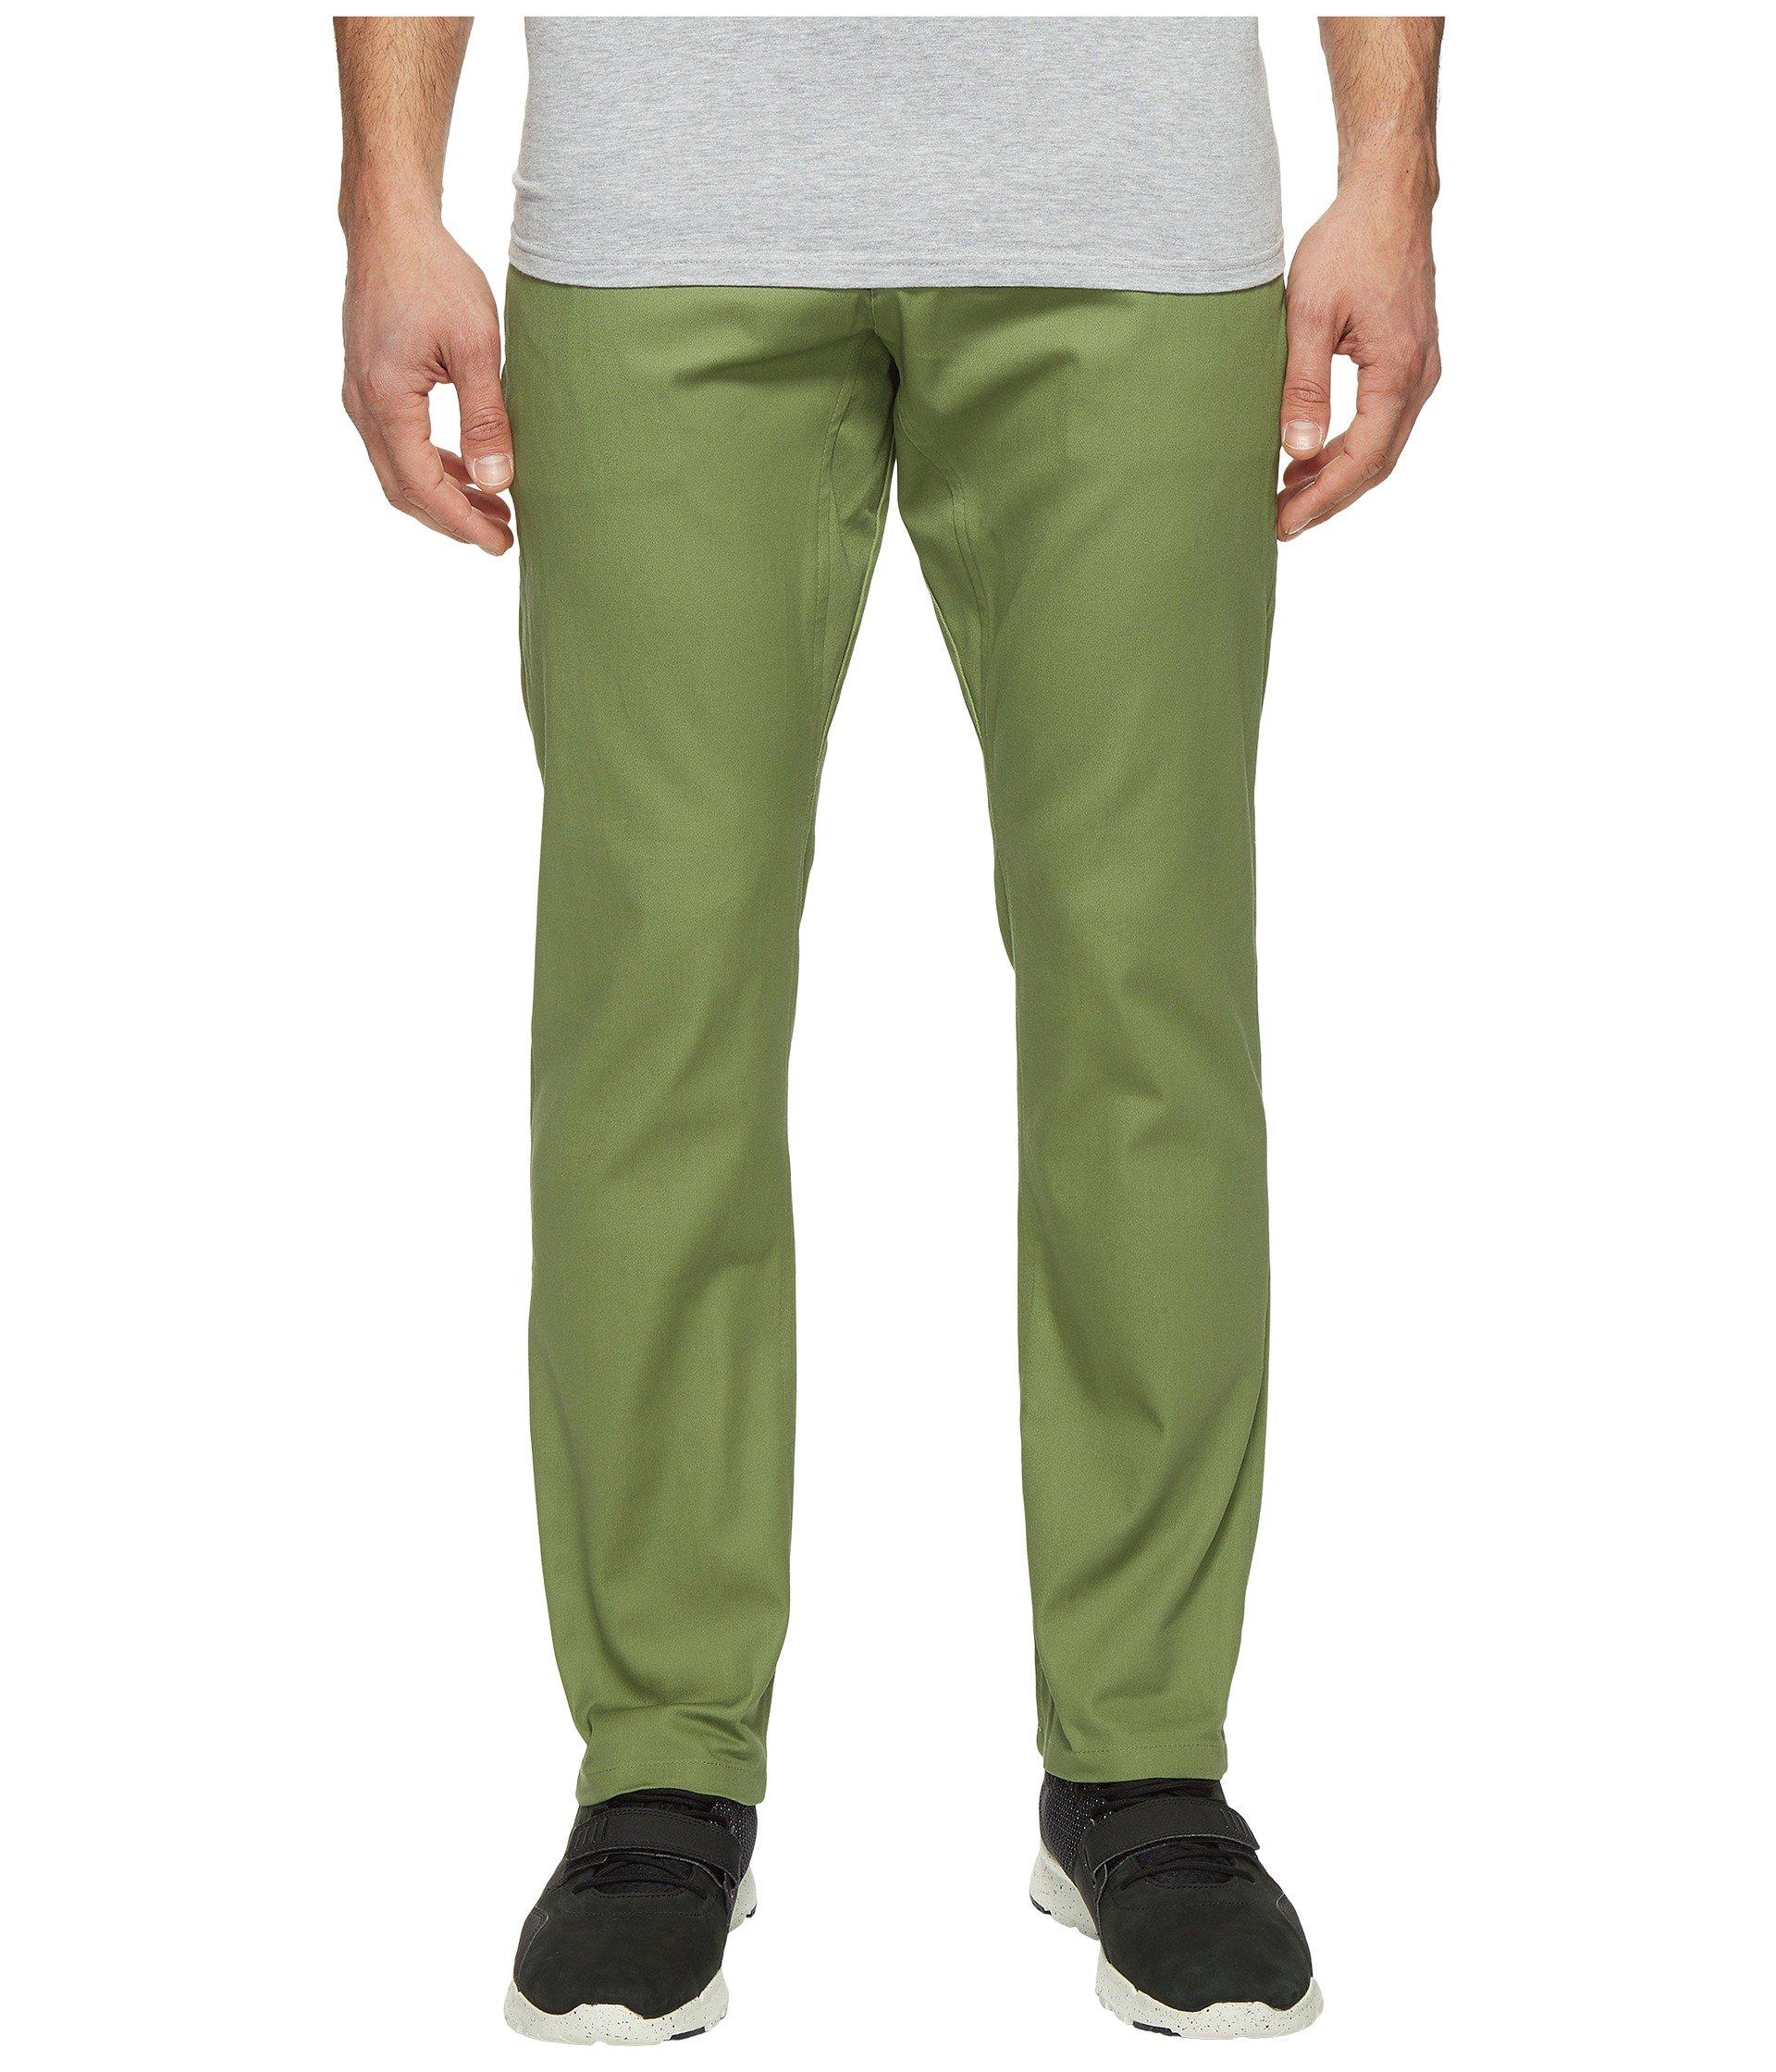 Lyst - Nike Sb Ftm Chino Pants in Green for Men - Save 34%